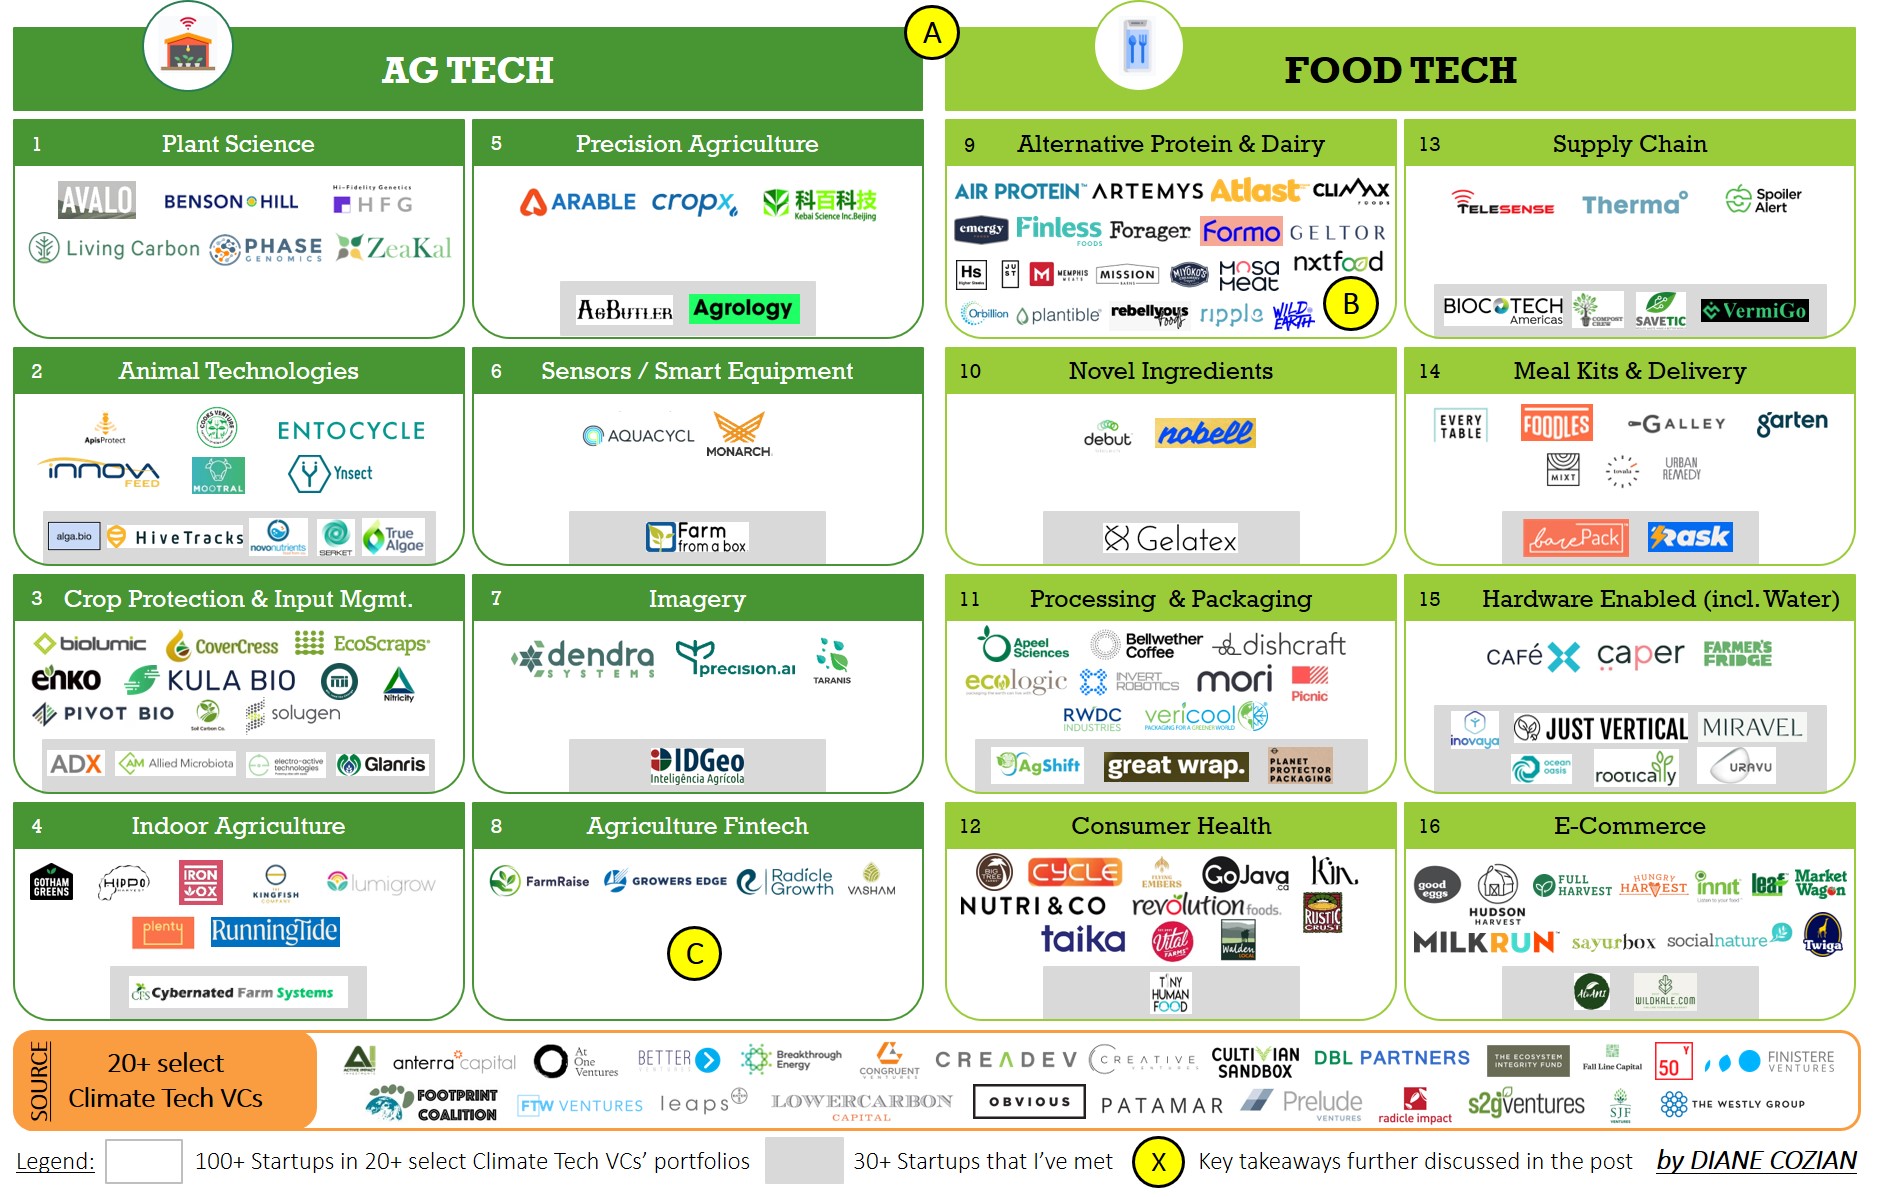 Market Map of Food & Ag: 100+ climate tech startups (mostly early-stage and VC-backed). (Image: Diane Cozian)